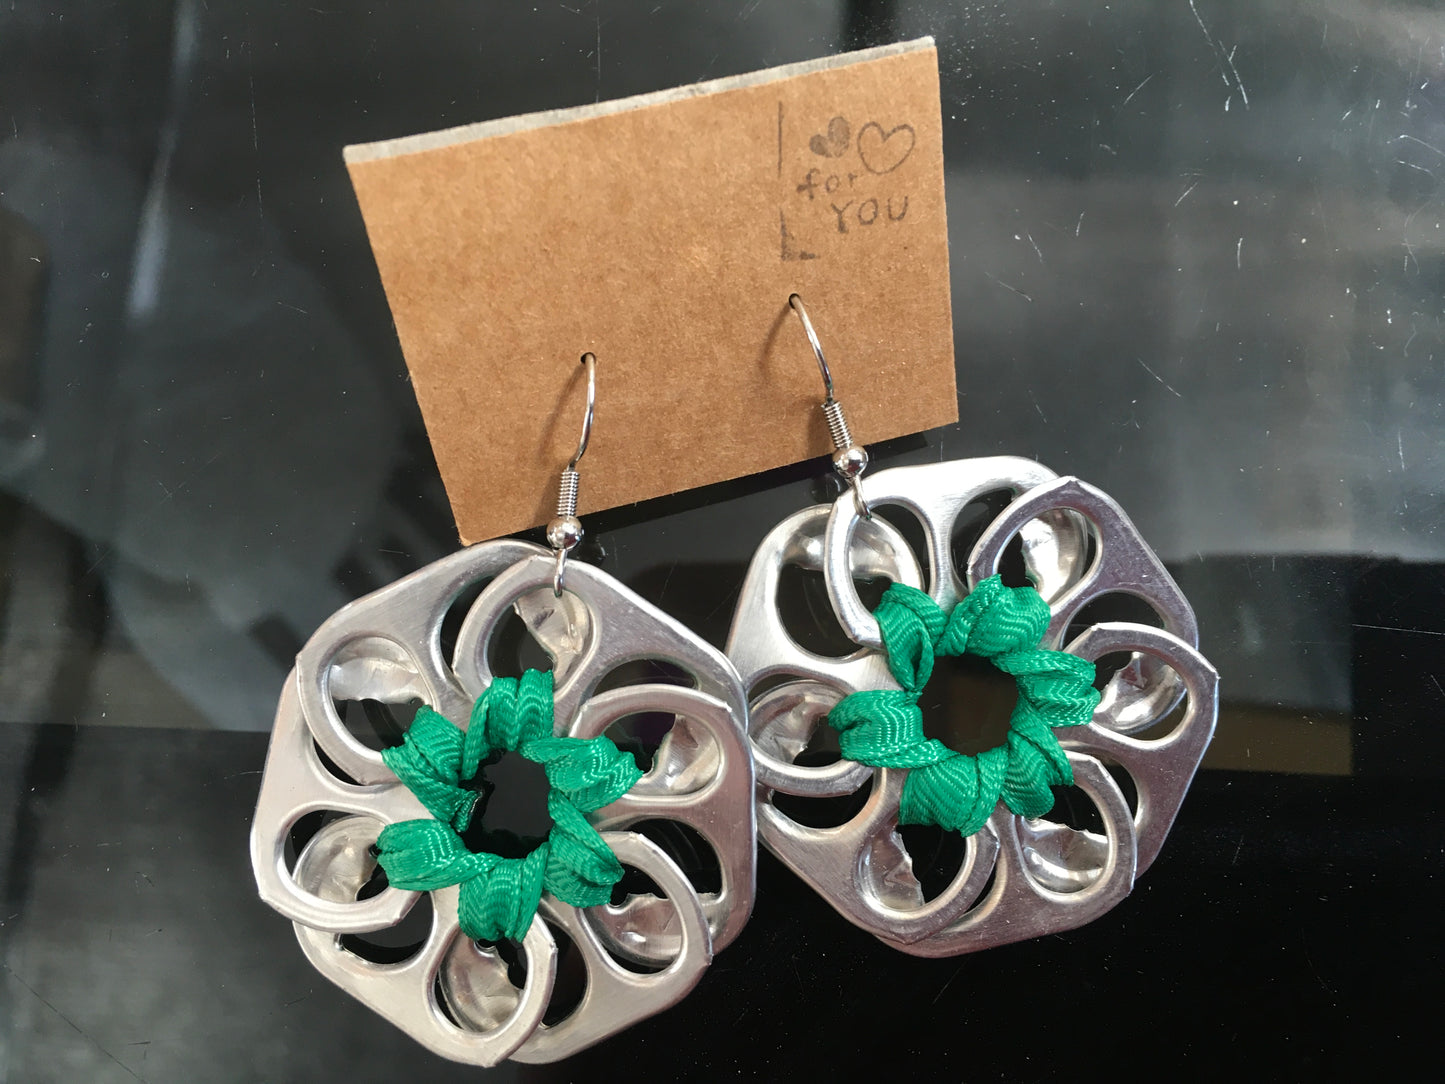 Earrings - Recycled Can Ring Pulls